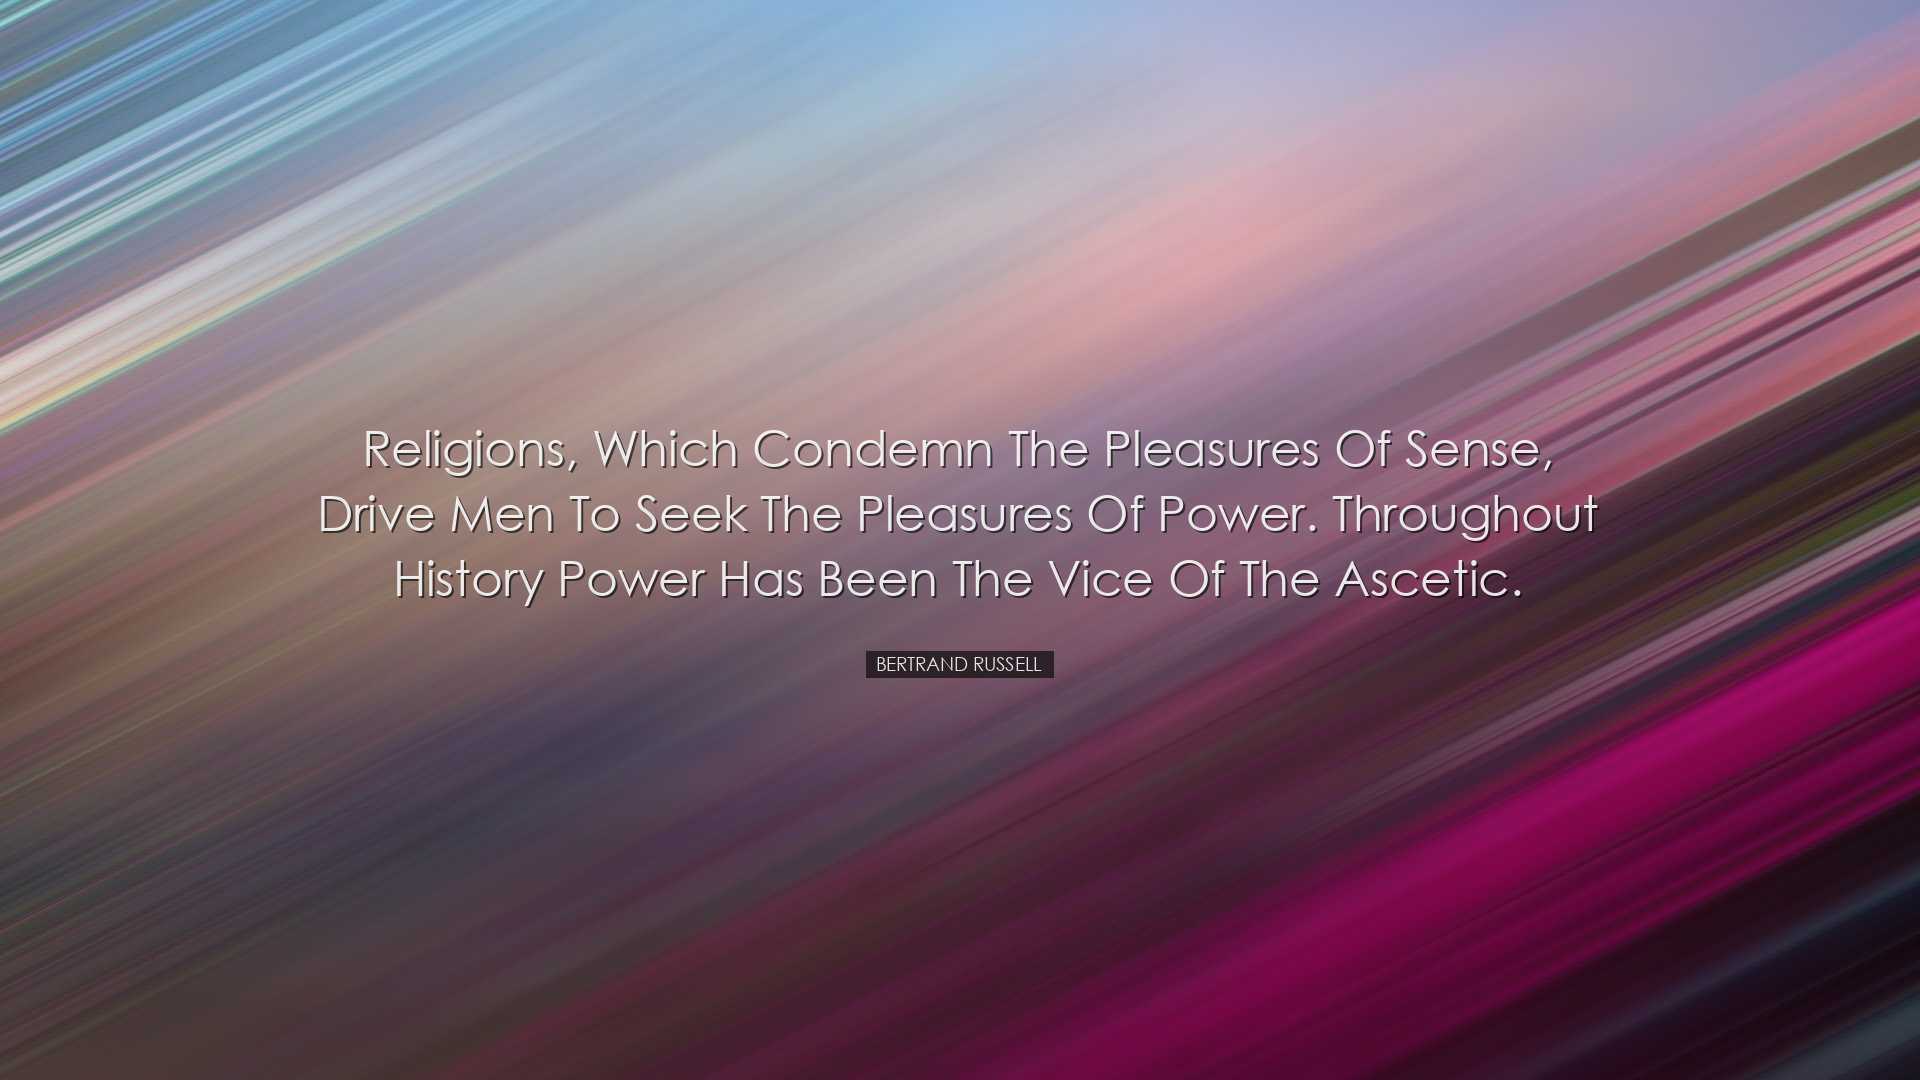 Religions, which condemn the pleasures of sense, drive men to seek